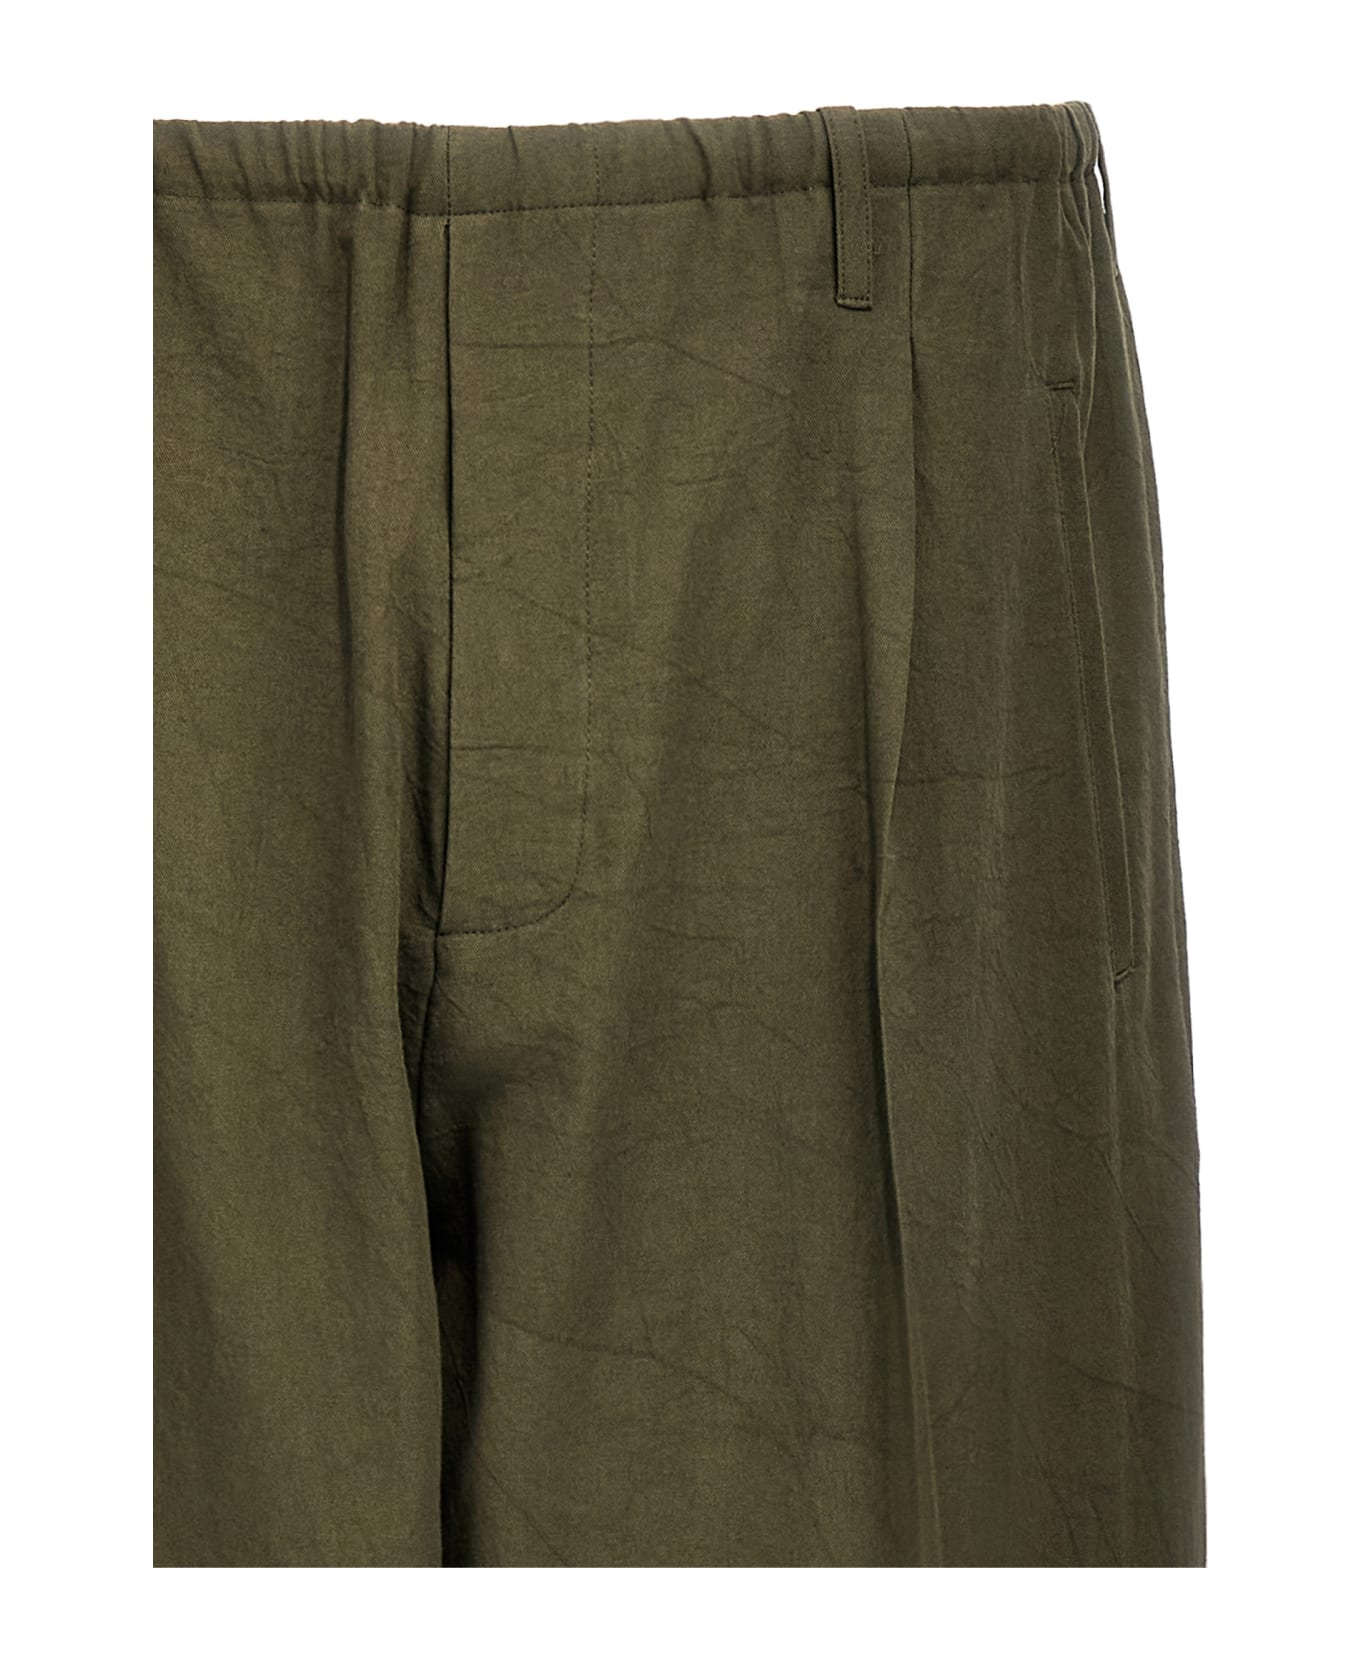 Magliano 'new People's' Pants - BROWN ボトムス